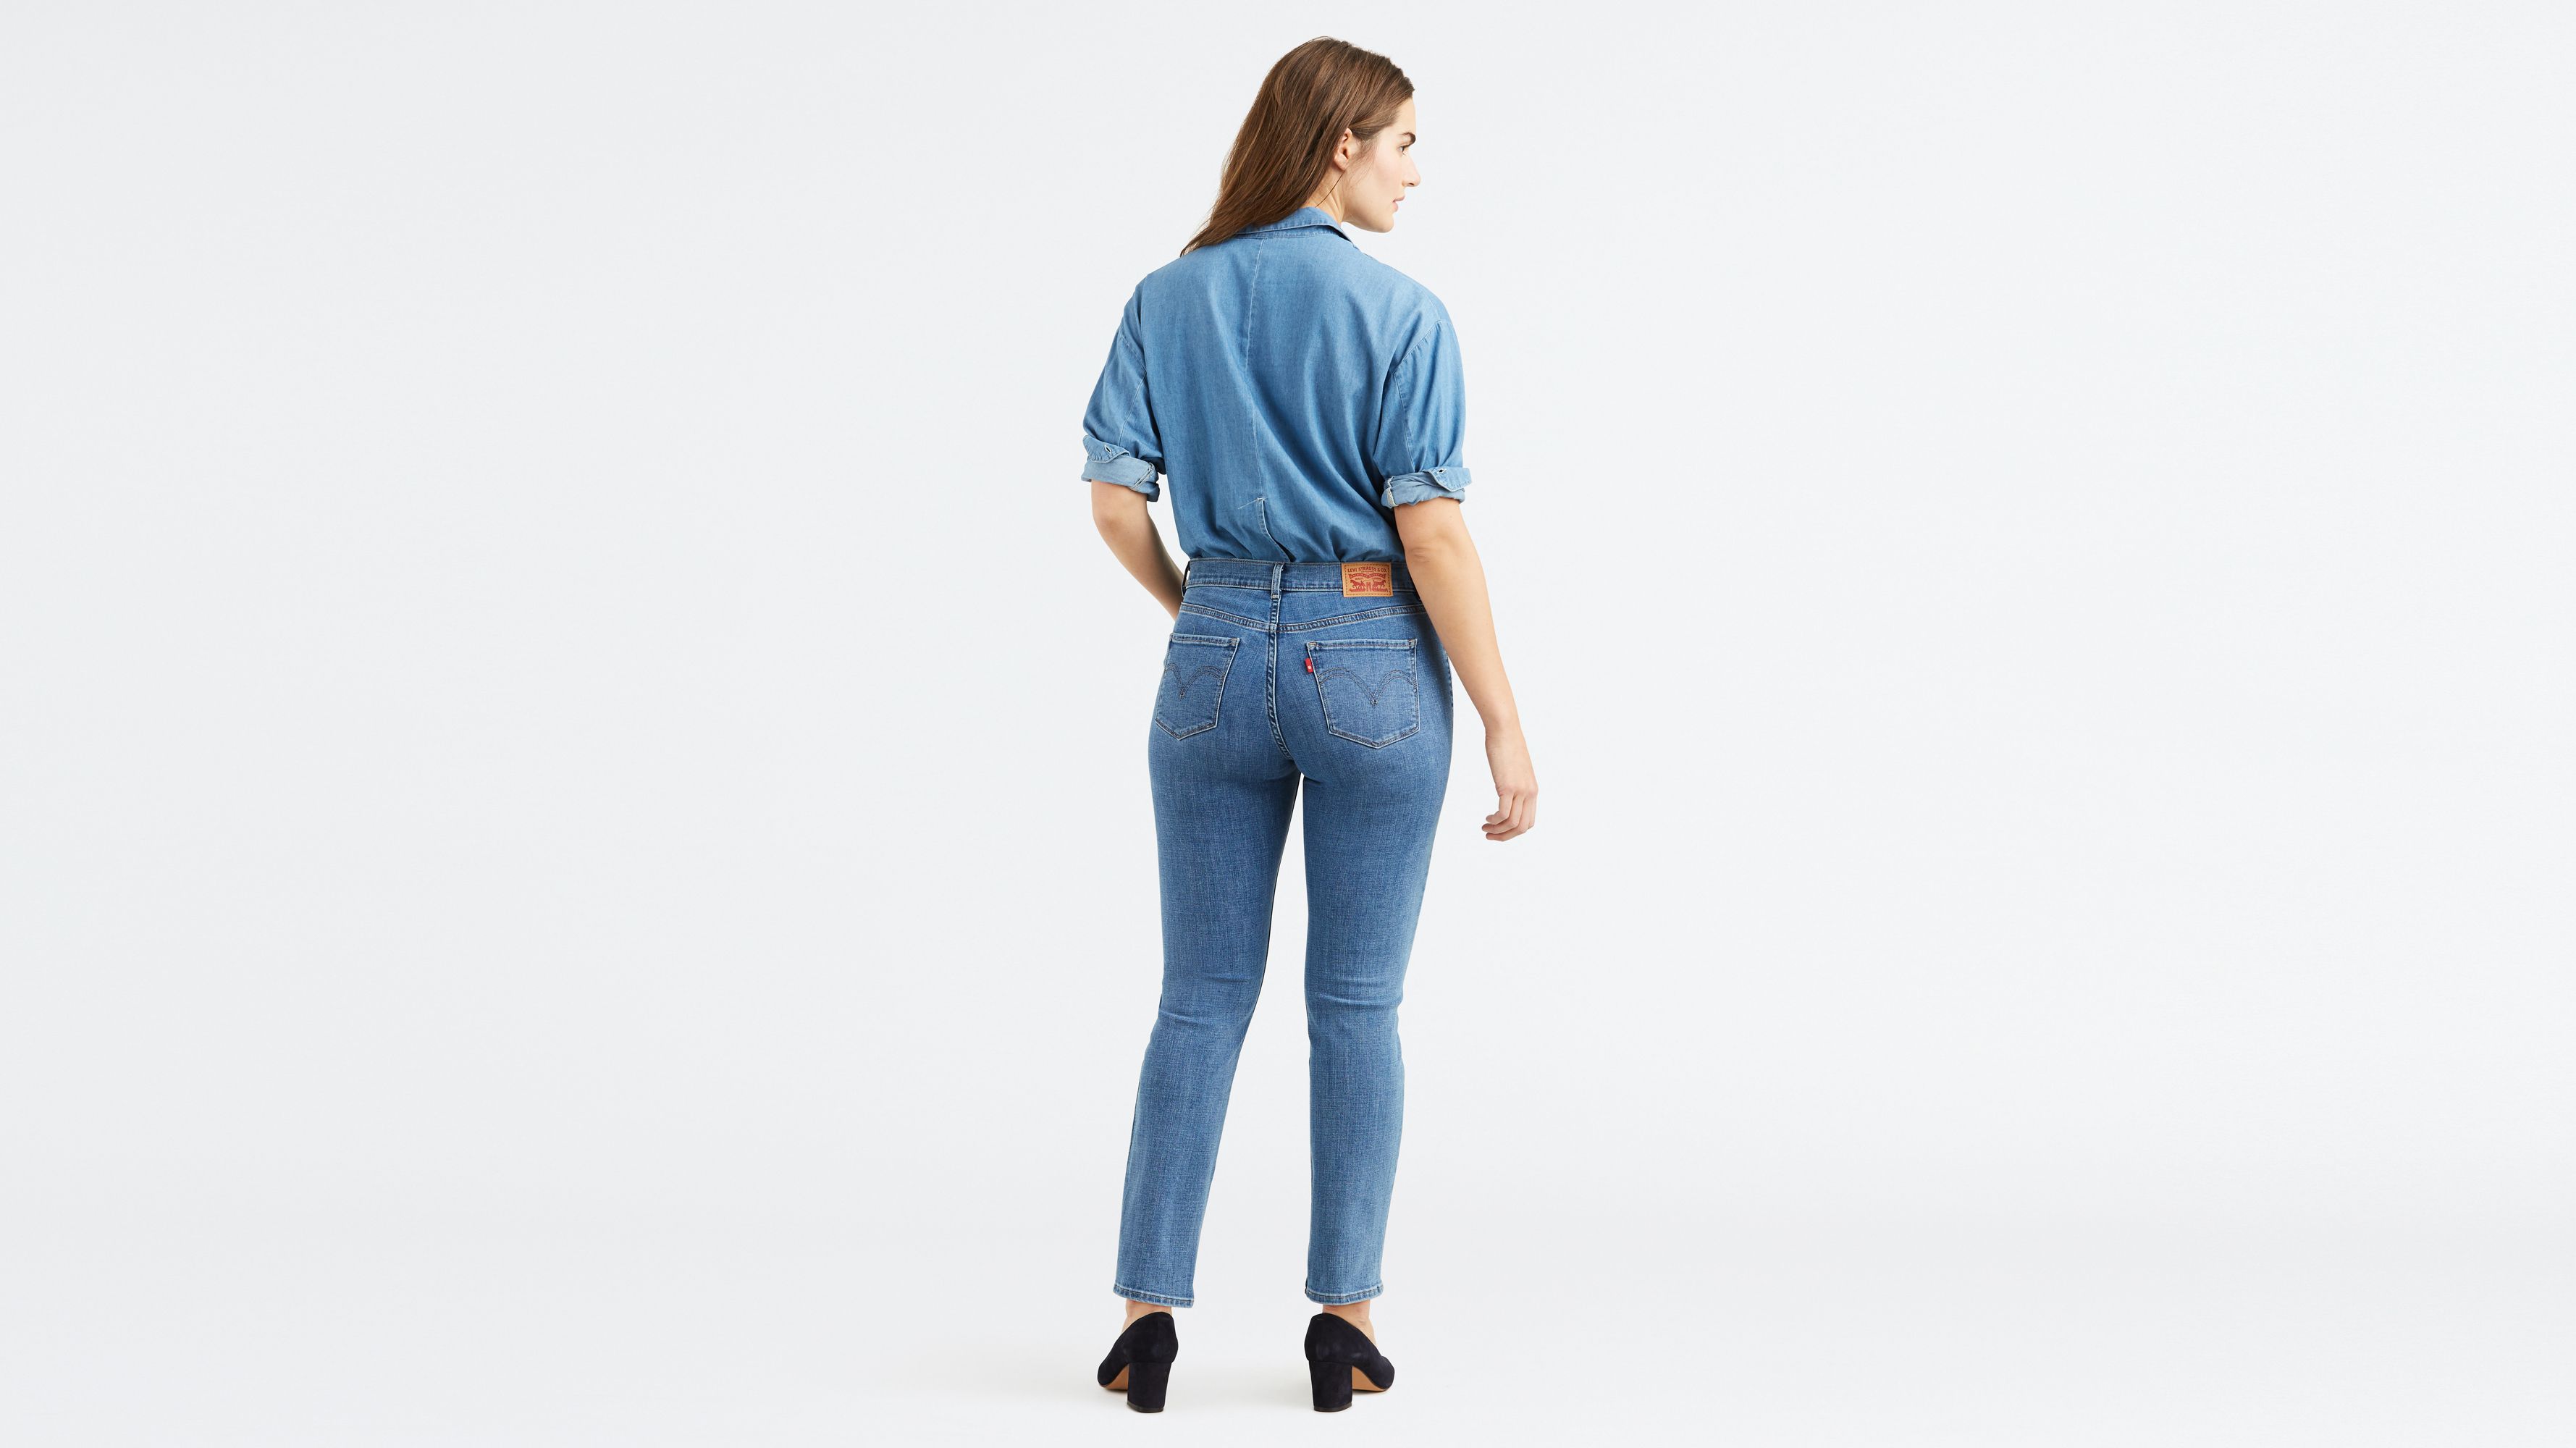 levi's classic straight womens jeans